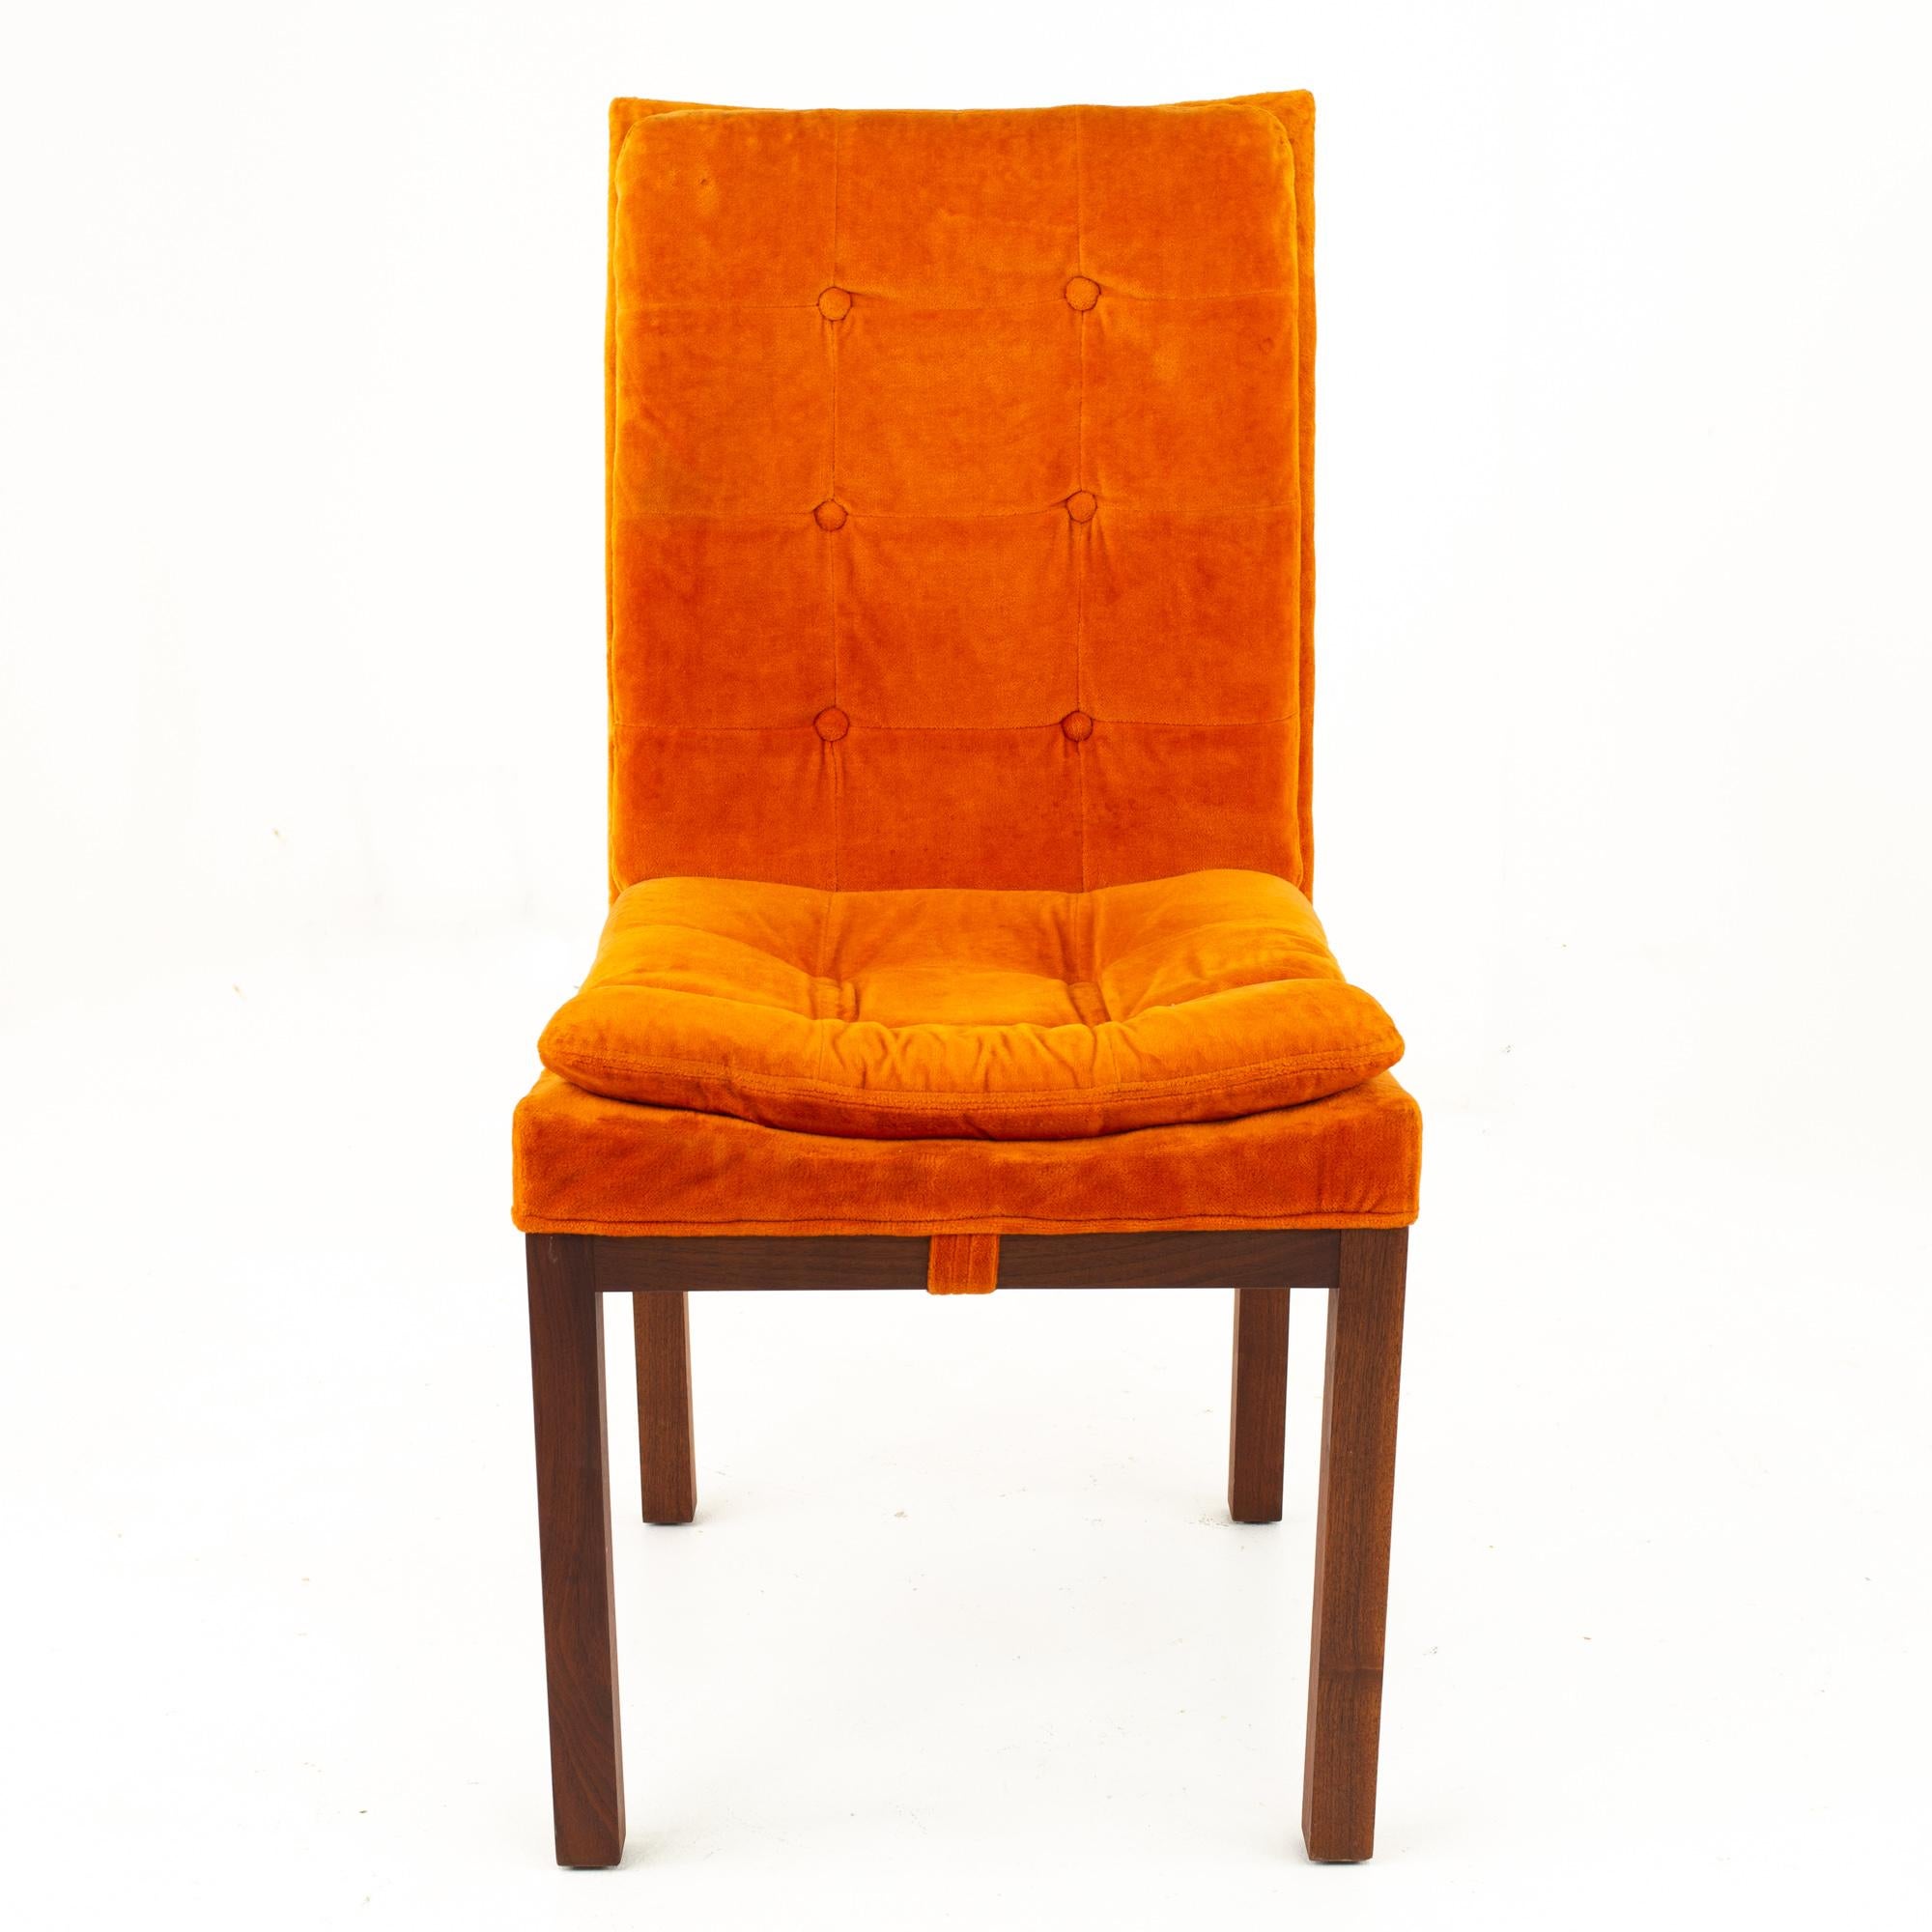 Milo Baughman Style Dillingham Orange and Walnut Upholstered Dining Chairs - Set 4